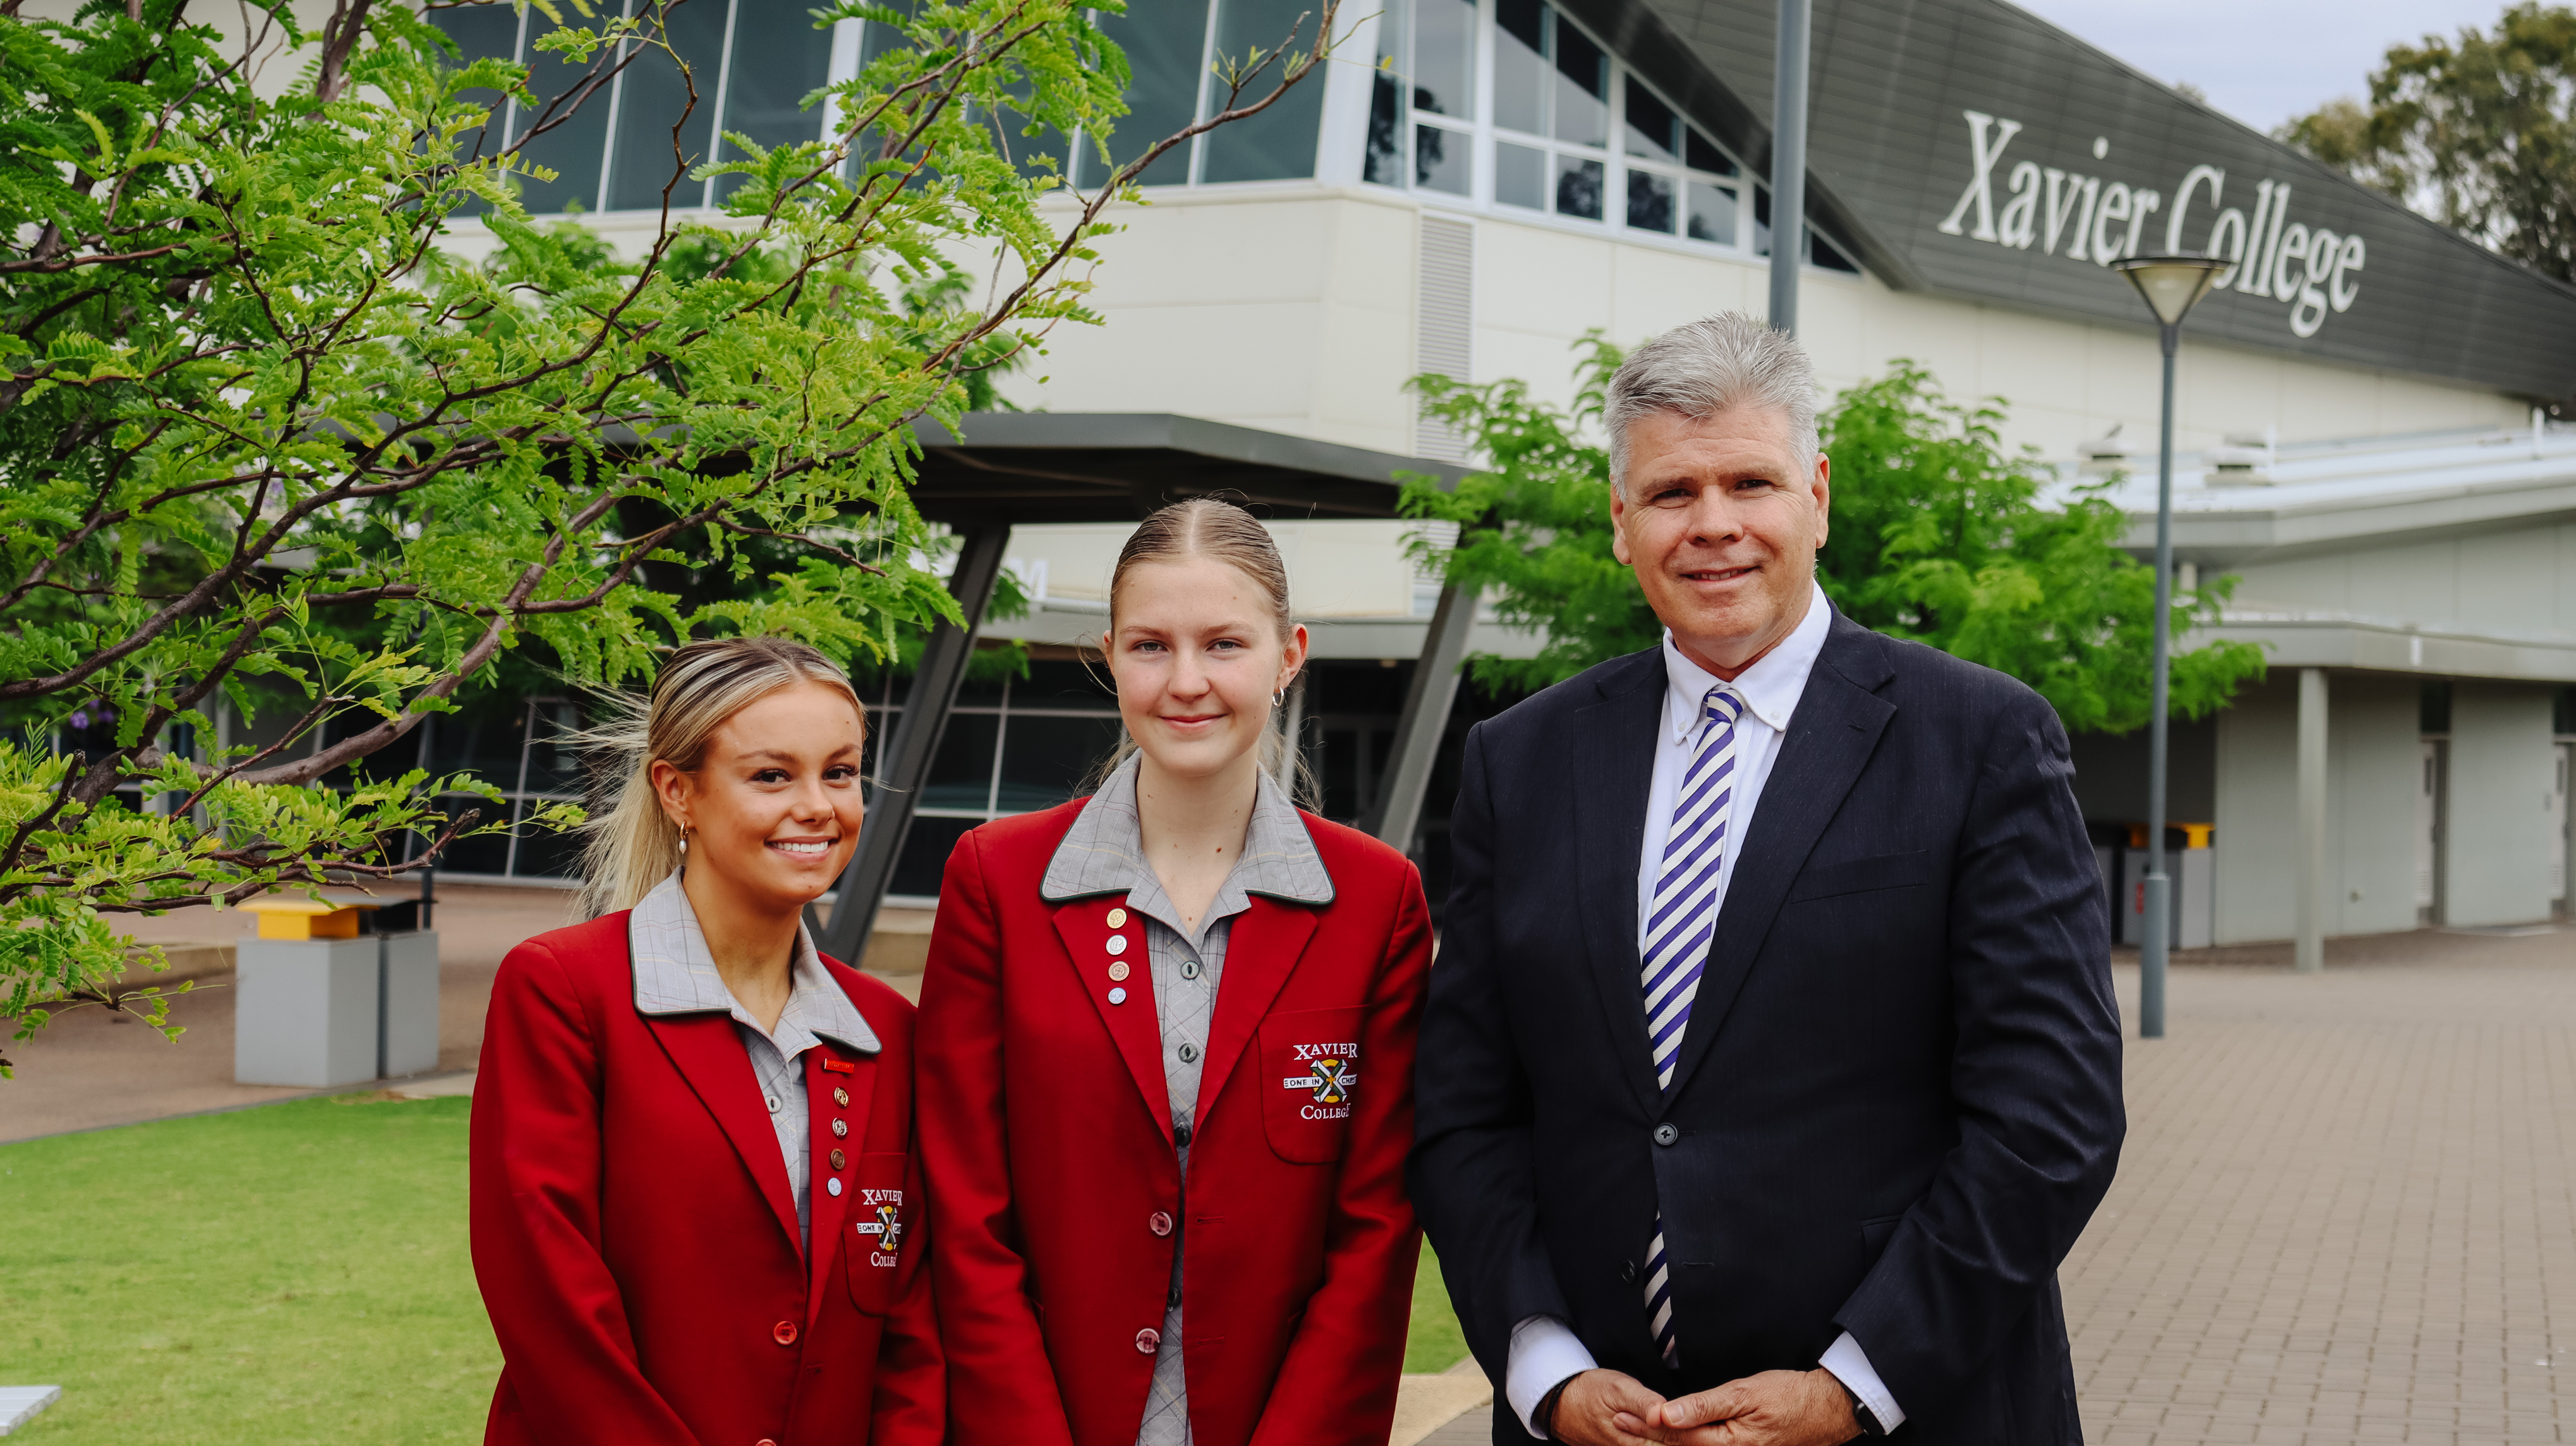 Alby Turnbull (2023 College DUX), Keeley Hurst (recipient of the Governor of South Australia Commendation - Excellence Award), and John Cameron, Head of Campus - Gawler Belt.